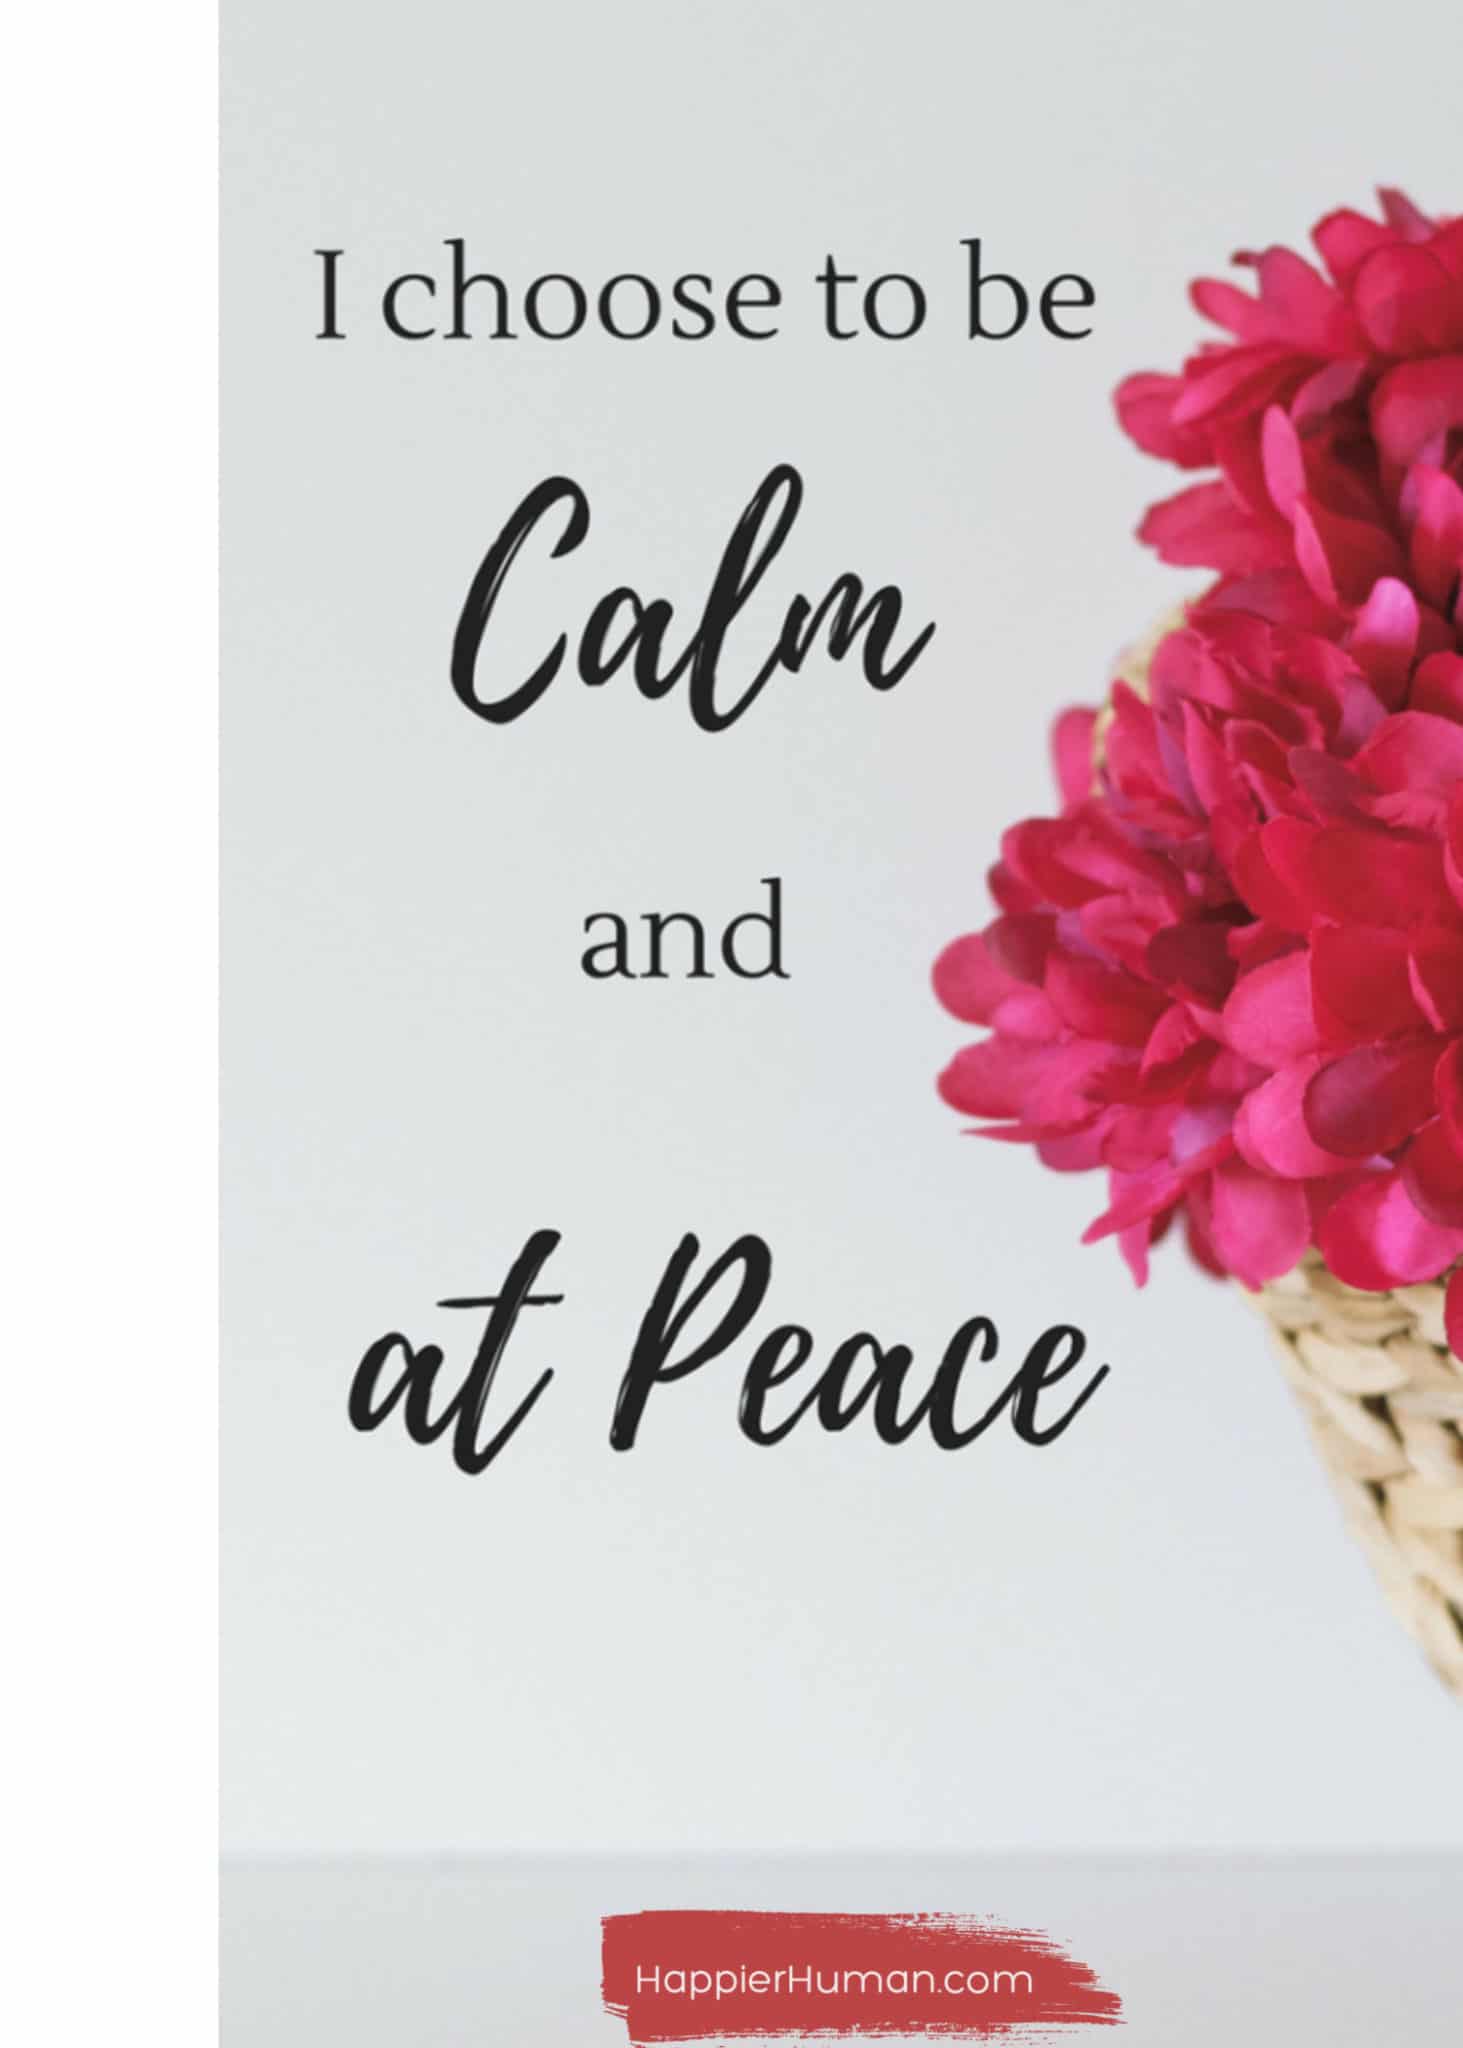 I choose to be calm and at peace